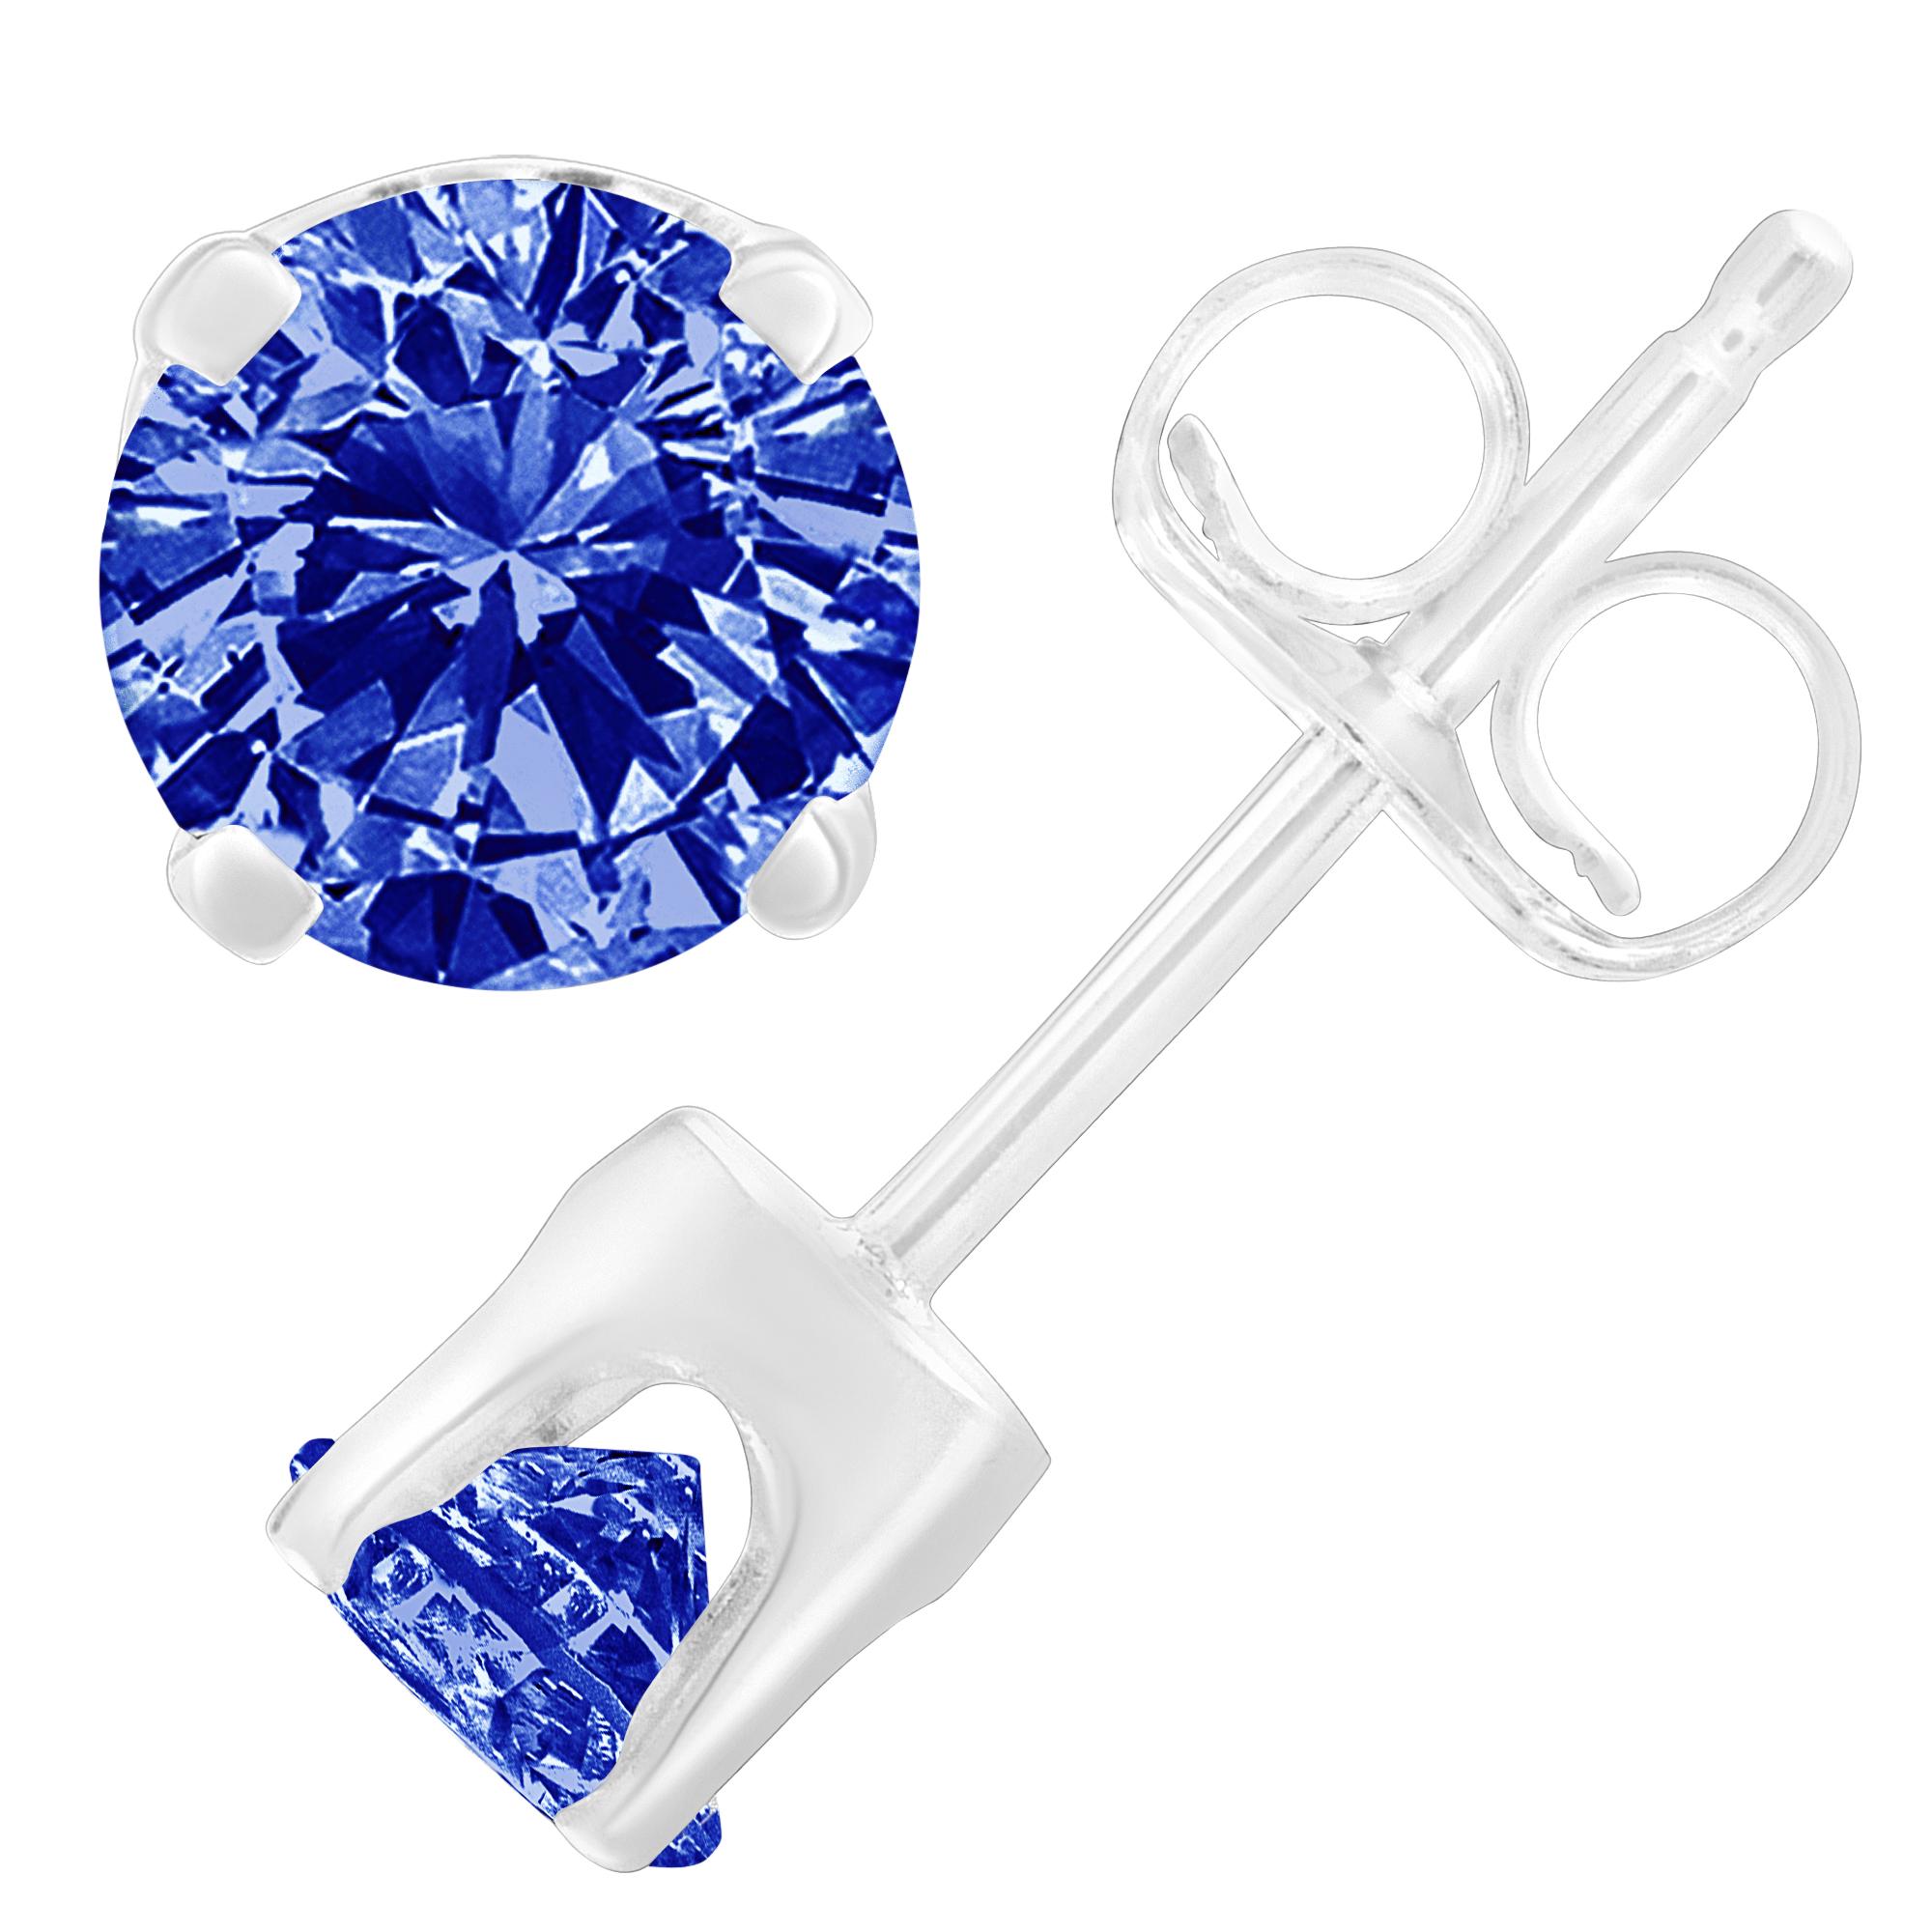 With a simple and classic design, these solitaire stud earrings feature 1/5ct TDW of diamonds. Blue, color treated, round cut diamonds in a prong setting sparkle in this design. Crafted in sterling silver, these stud earrings are perfect to wear